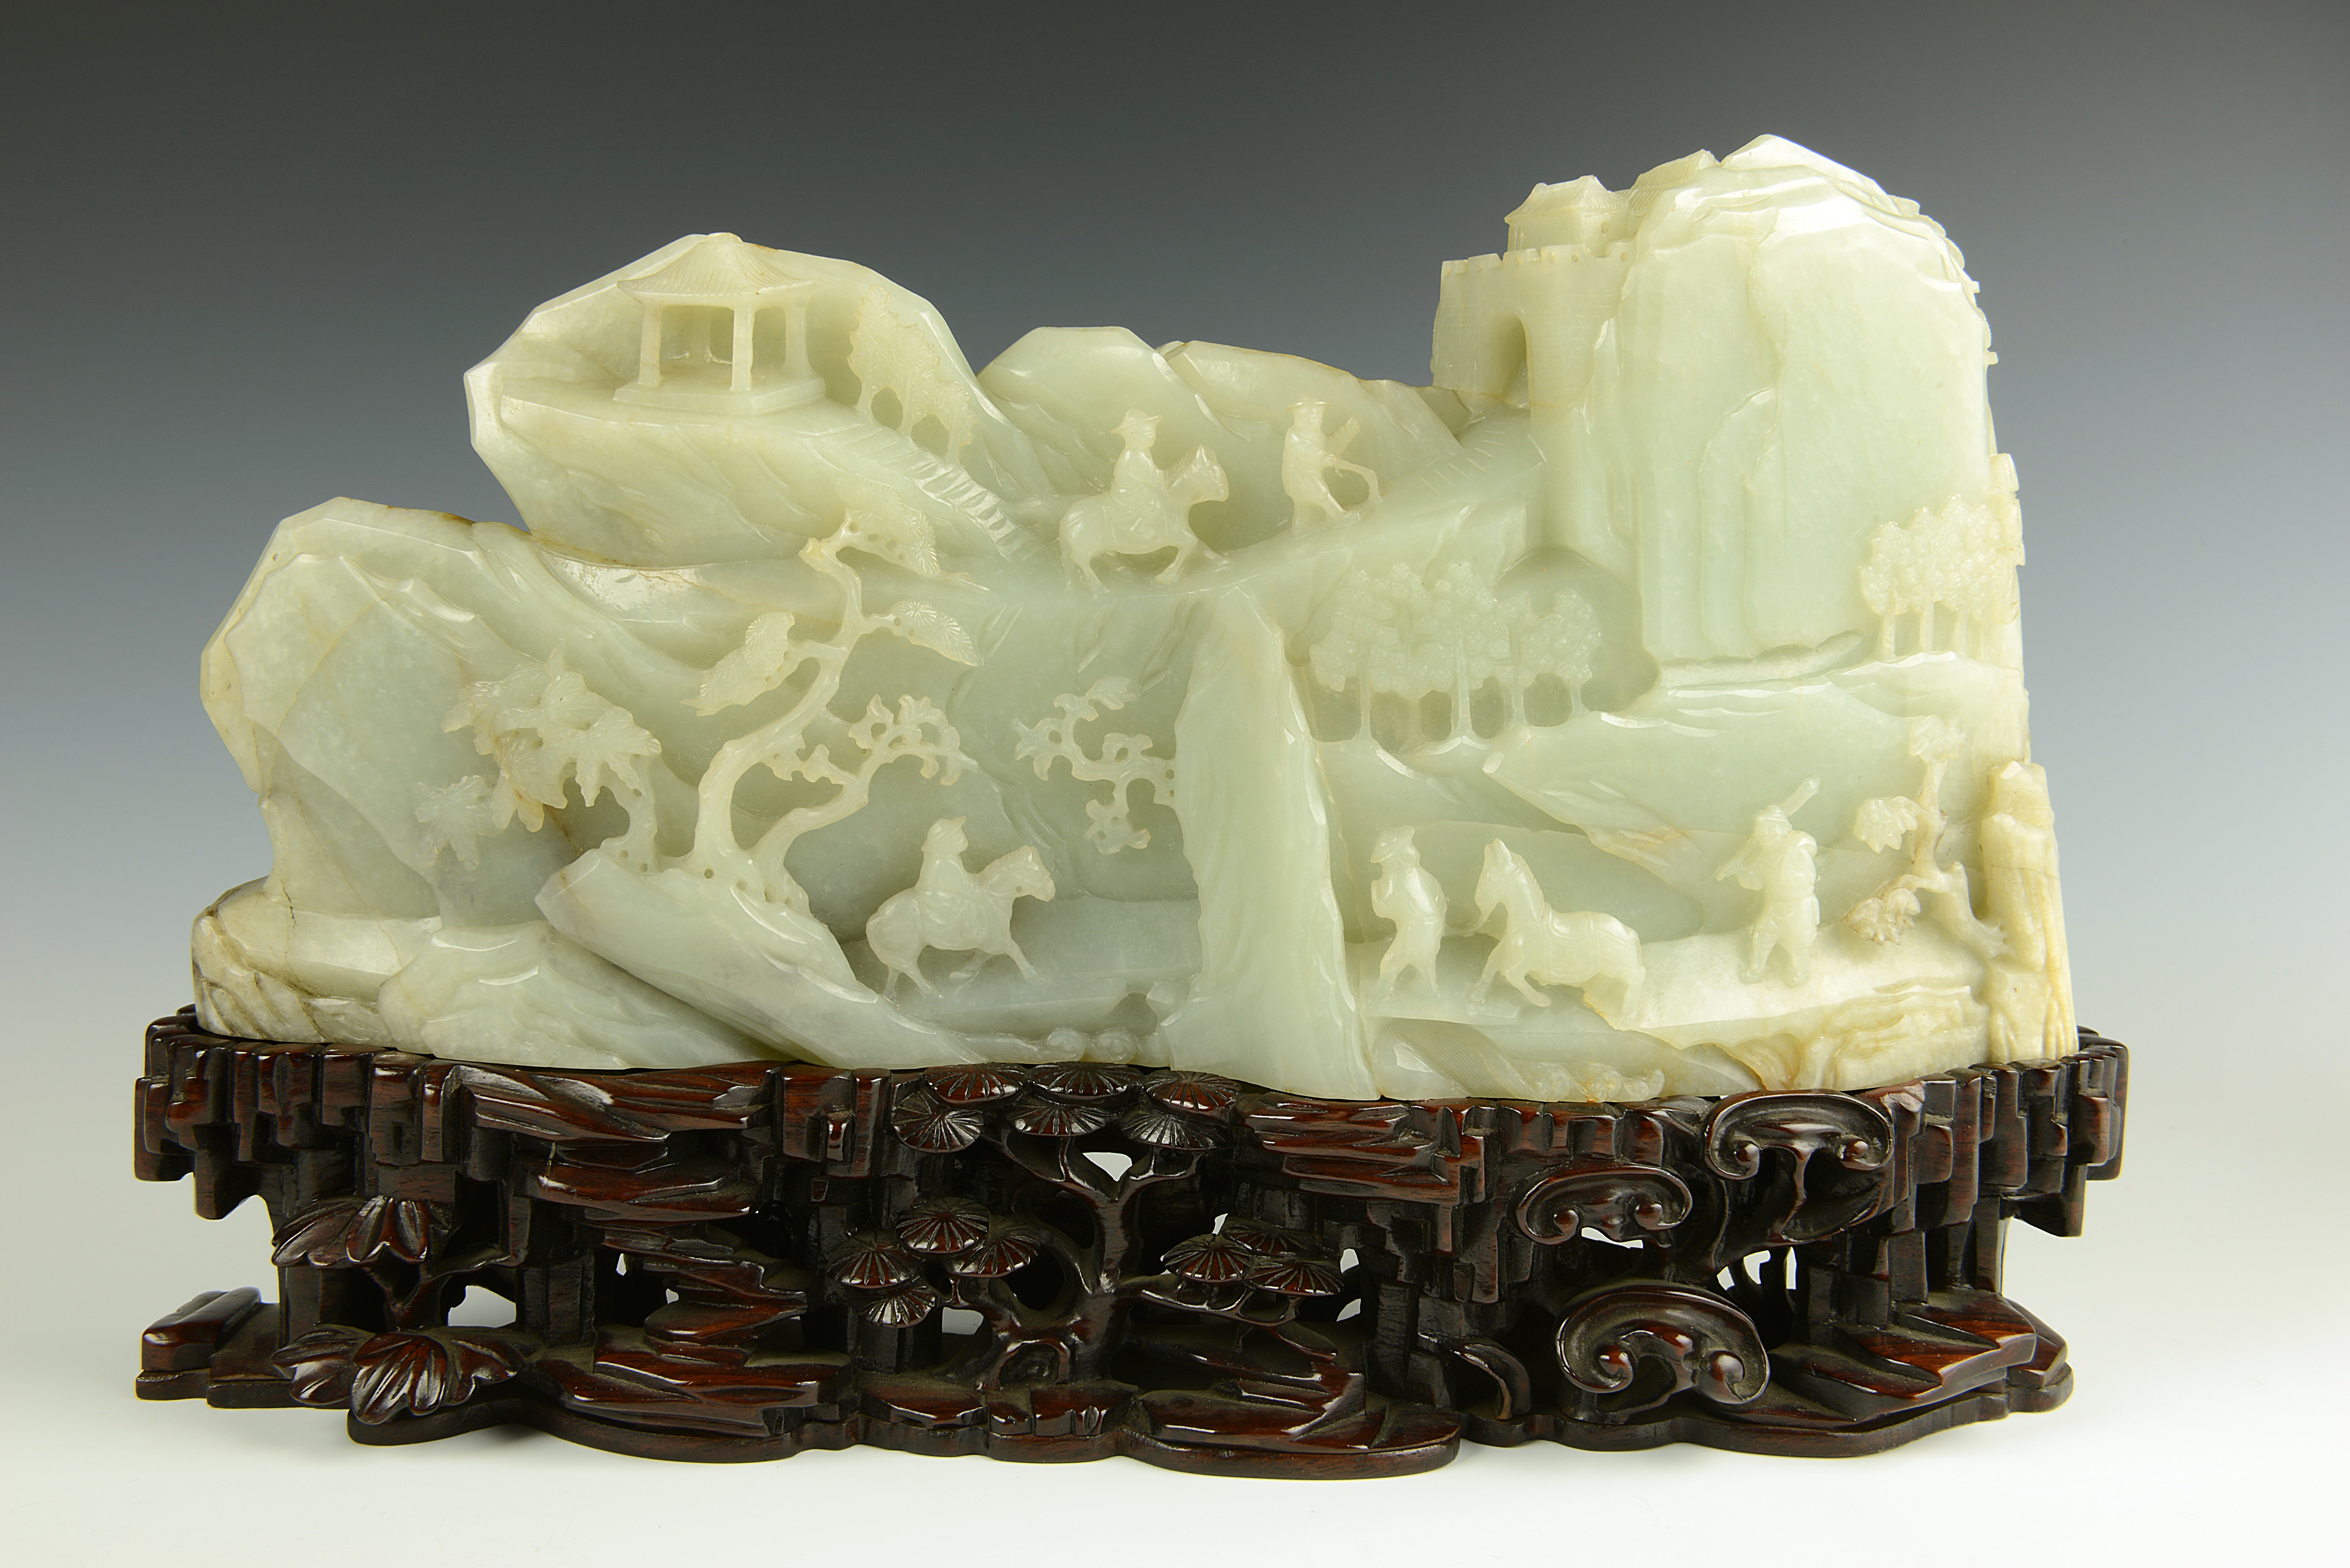 A carving in pale green jade of a mountain scene with trees and two human figures travelling along the side of the mountain, one on horseback and the other on foot carrying baskets over his shoulder. The carving stands on a carved wooden stand.